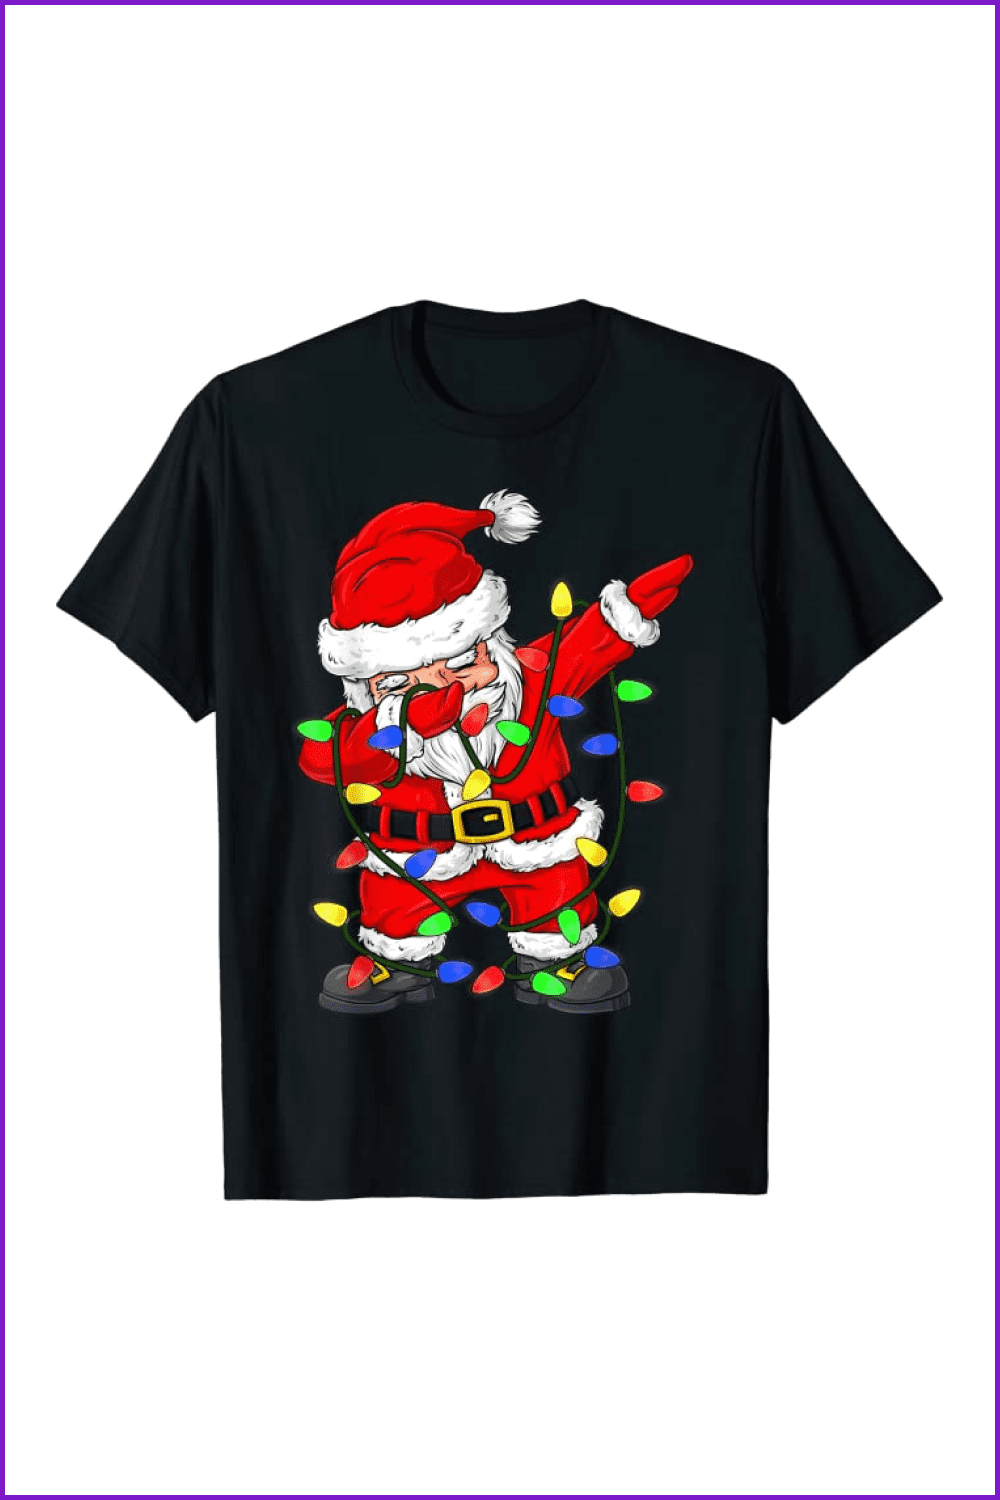 Black t-shirt with Dabbing Santa with the tree lights.